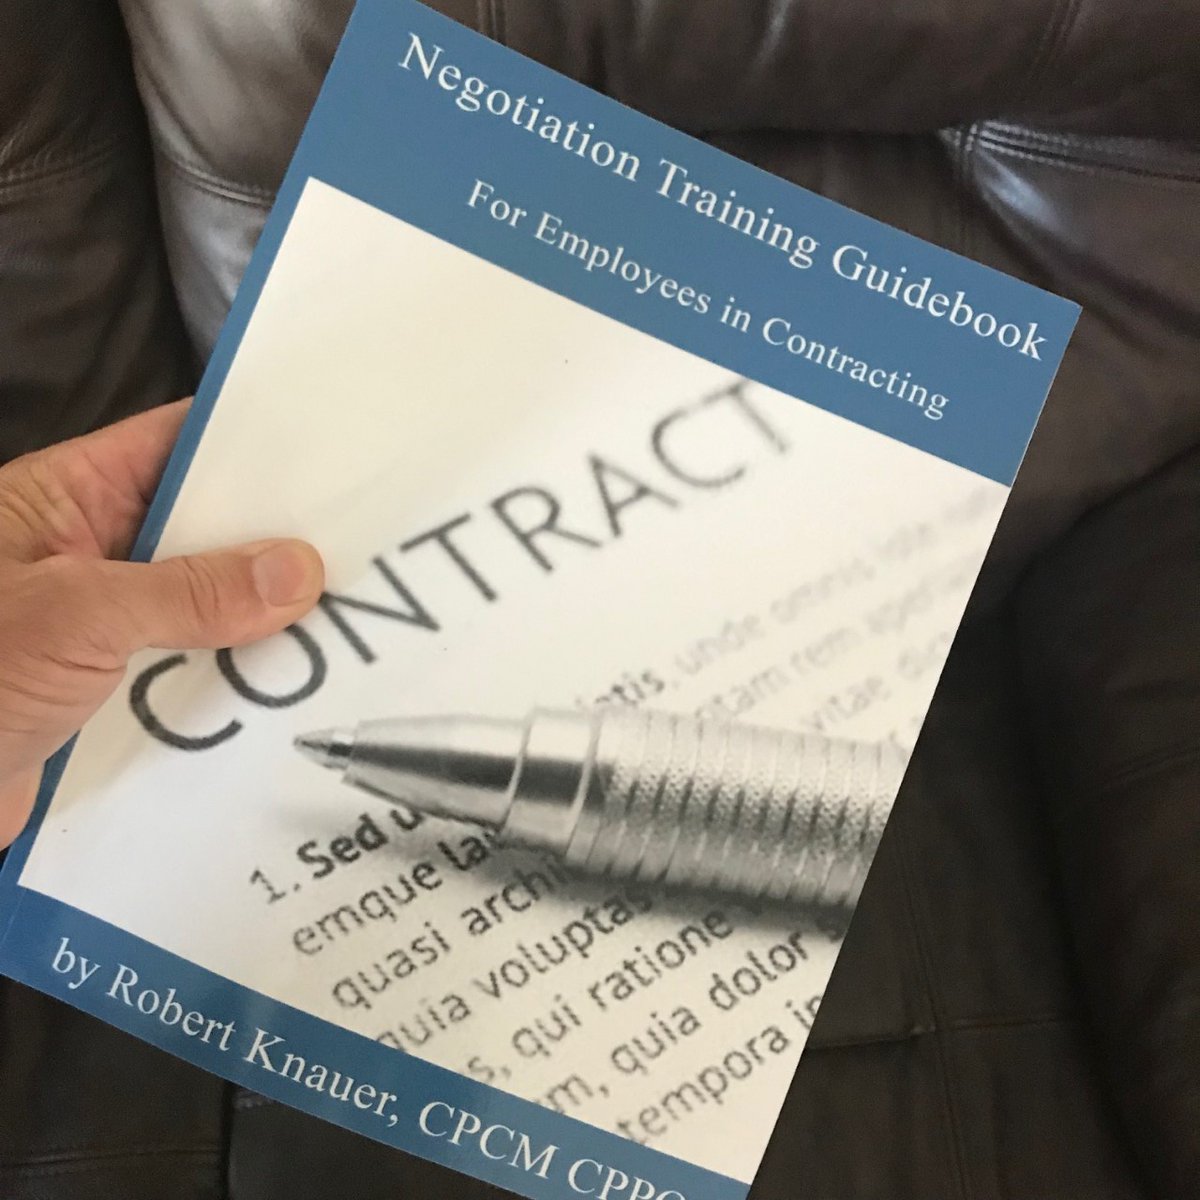 IF YOU ARE IN BUSINESS, CONTRACTING WITH, OR PERFORMING PROGRAM MANAGEMENT FOR GOVERNMENT-- YOU MIGHT FIND MY TECHNICAL GUIDEBOOKS HELPFUL.  AVAILABLE Amazon Books